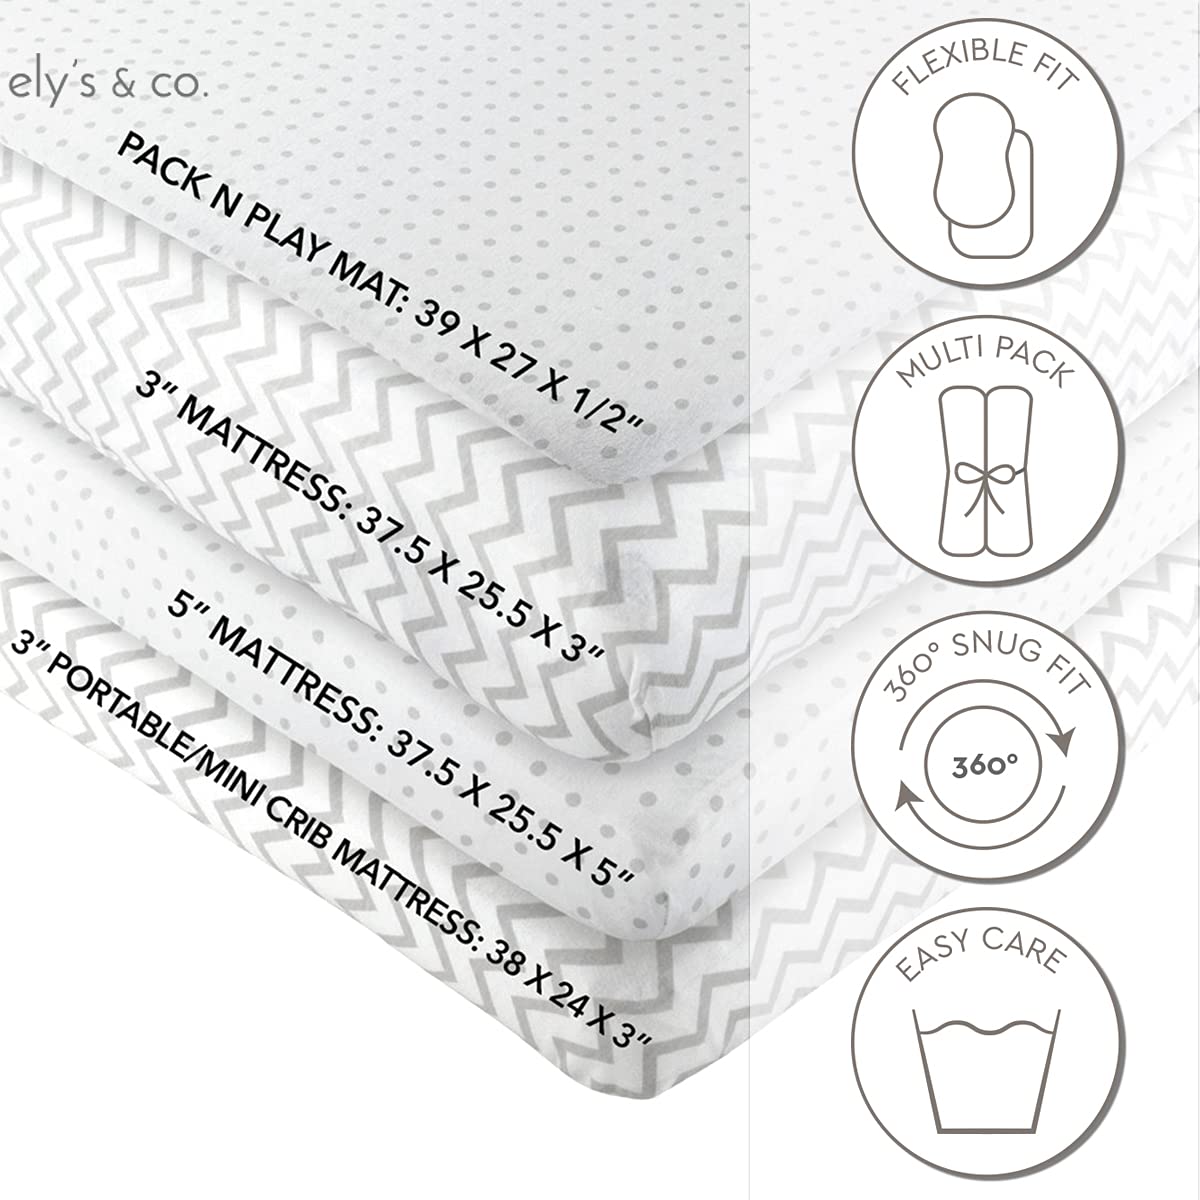 Pack N Play Portable Crib Sheet Set 100% Jersey Cotton Unisex for Baby Girl and Baby Boy by Ely's & Co. (Grey Chevron and Polka Dot)